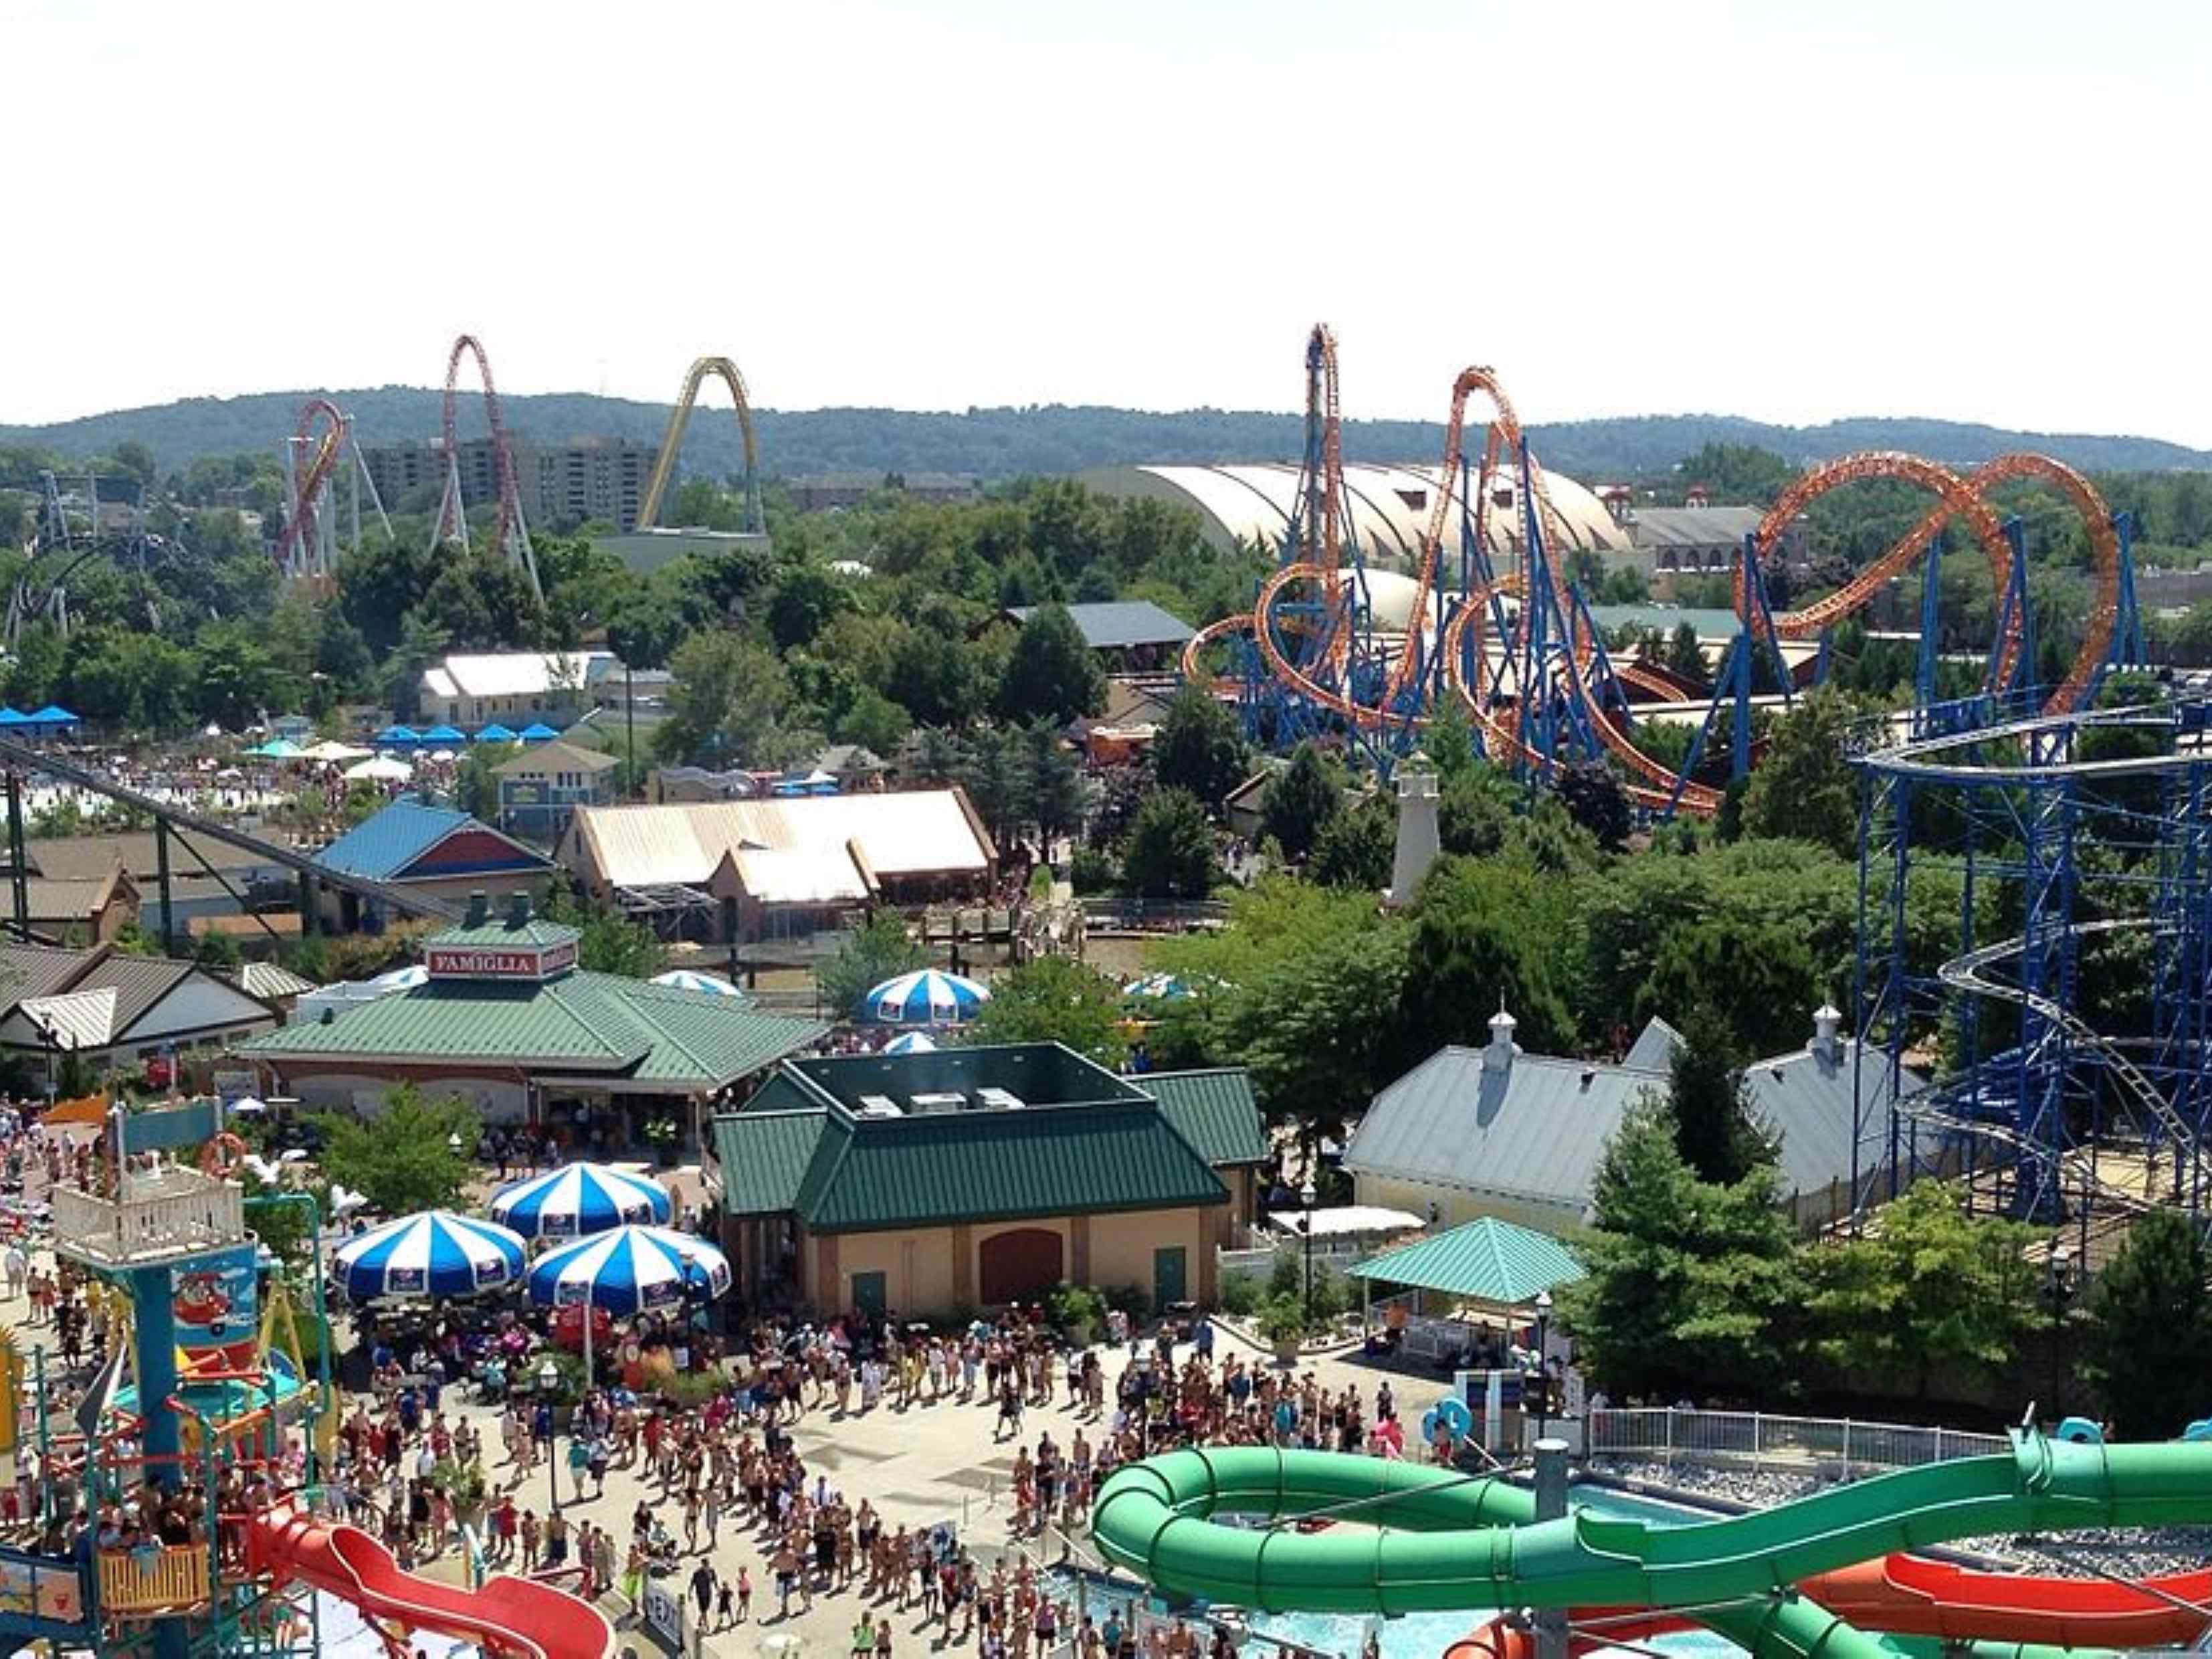 Vitist Hersheypark and see the "new" Chocolatetown expansion